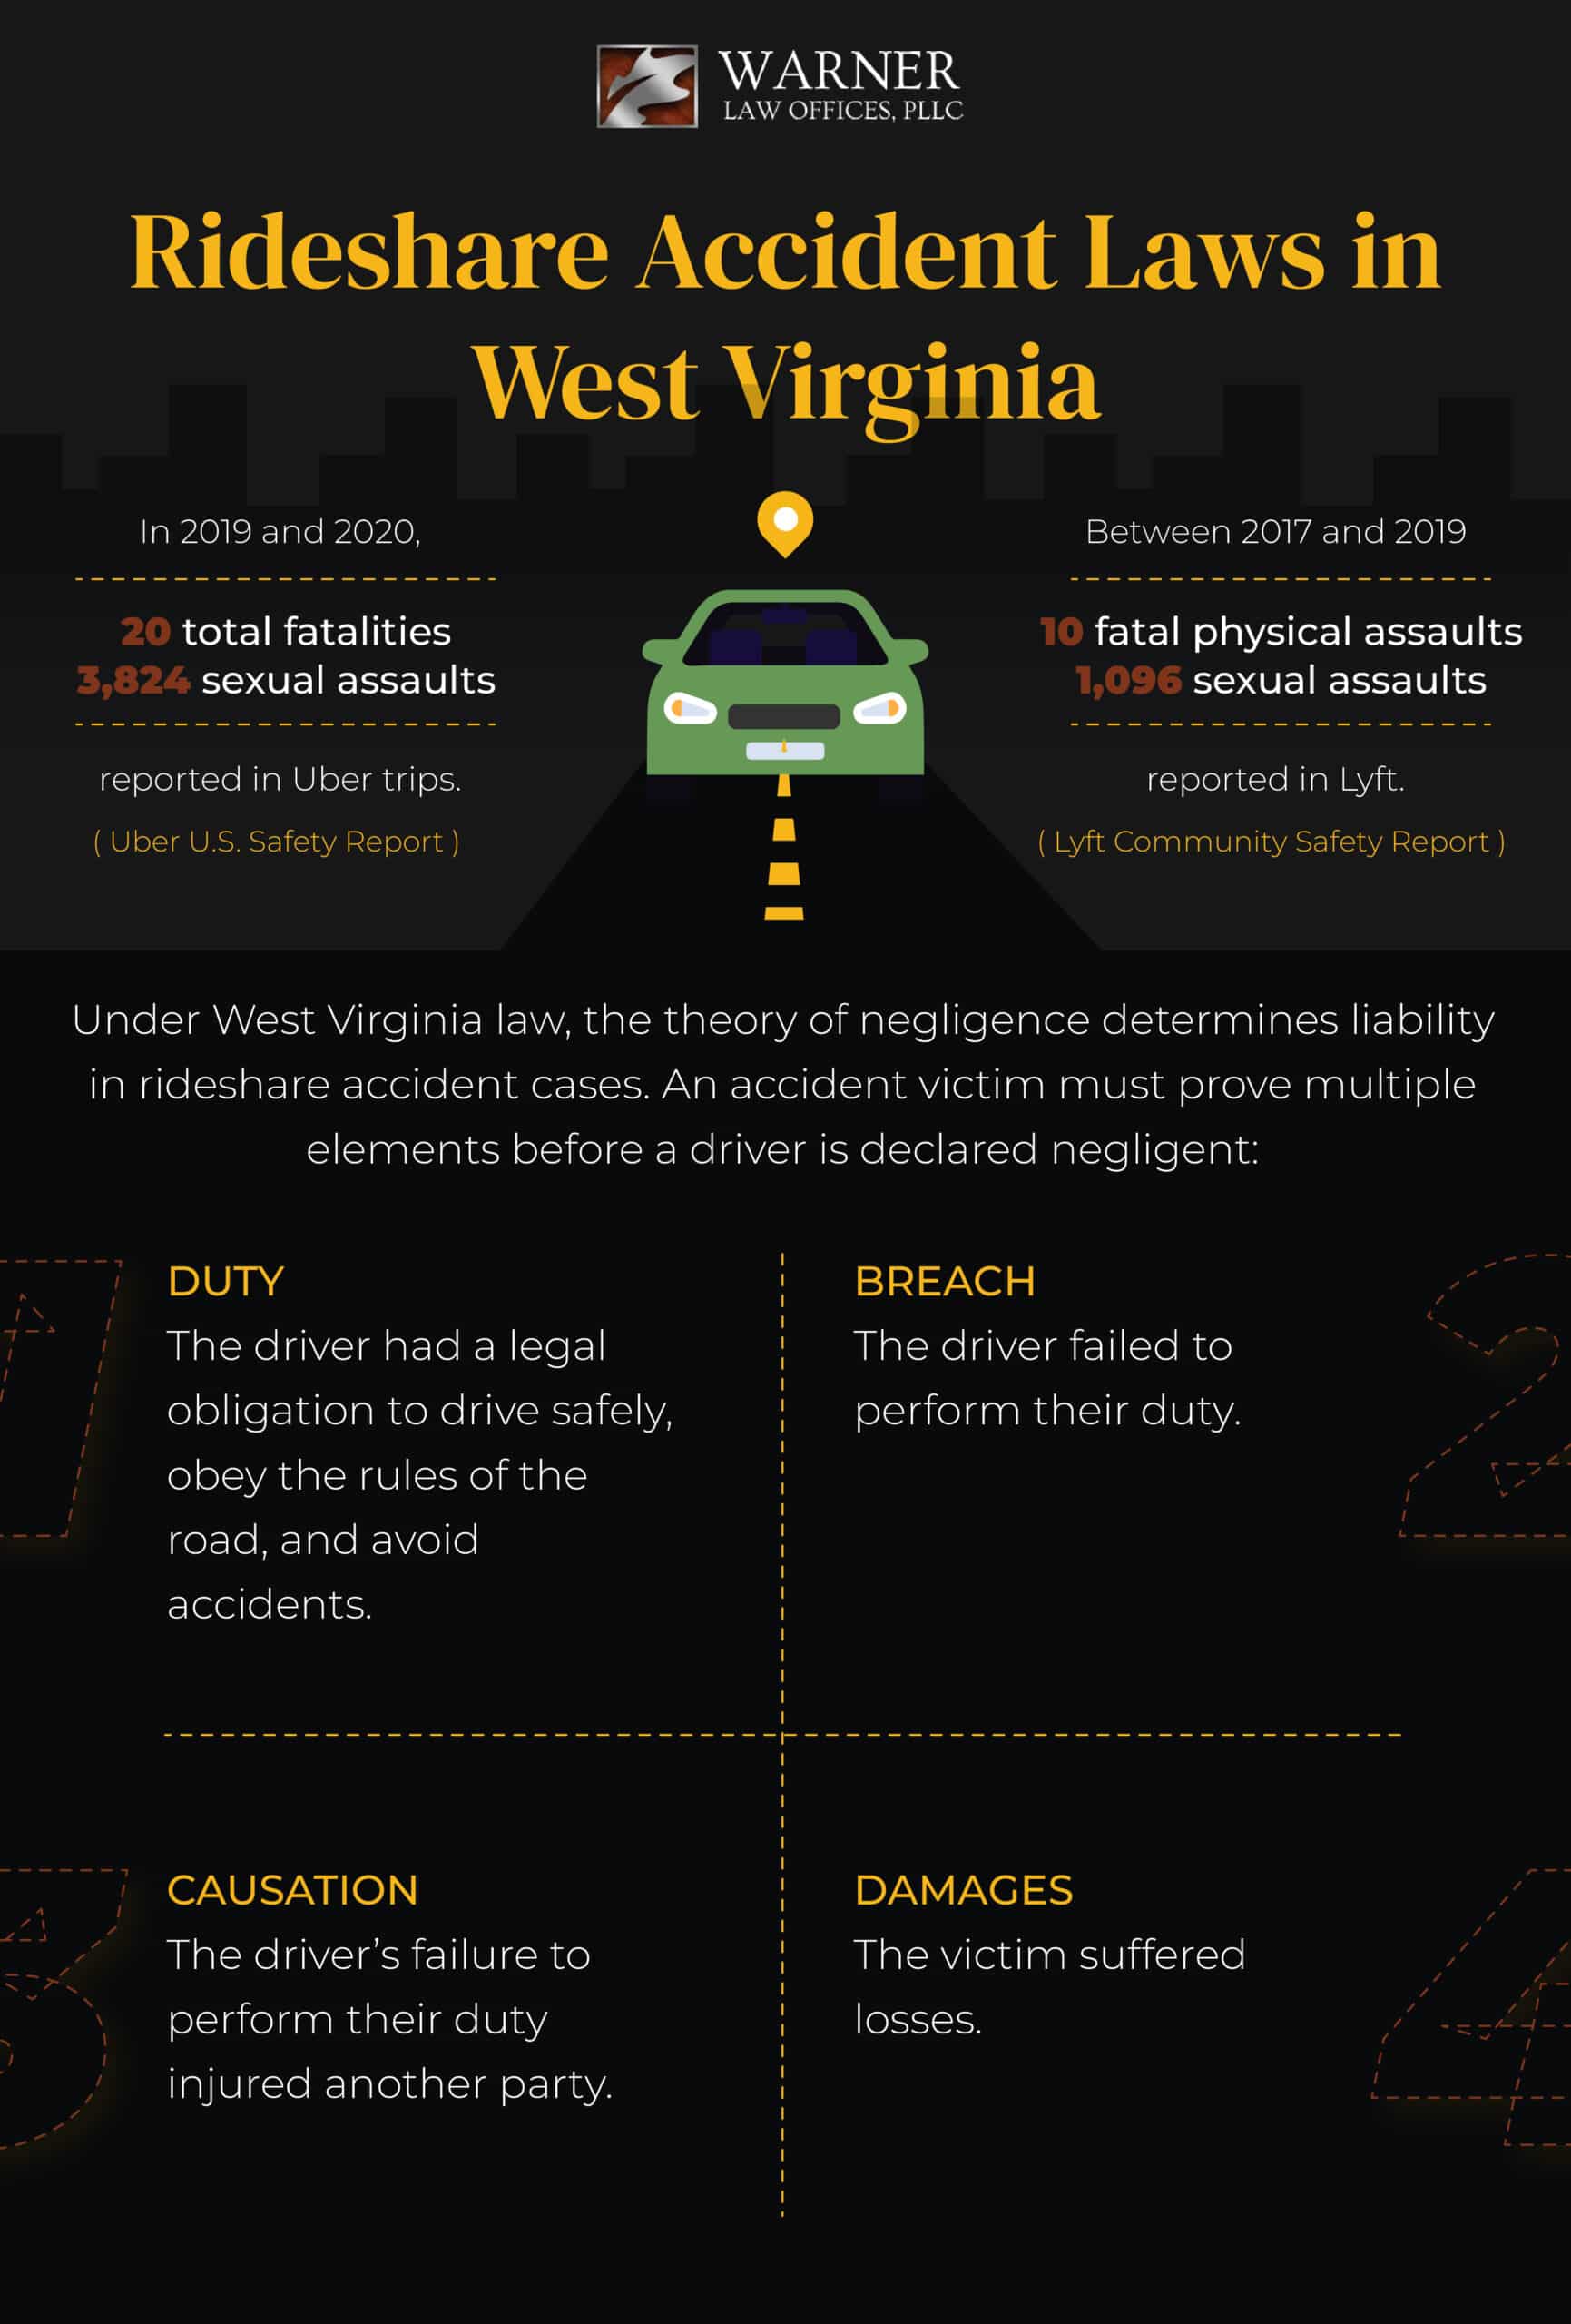 Infographic detailing rideshare accident laws in West Virginia regarding negligence and liability